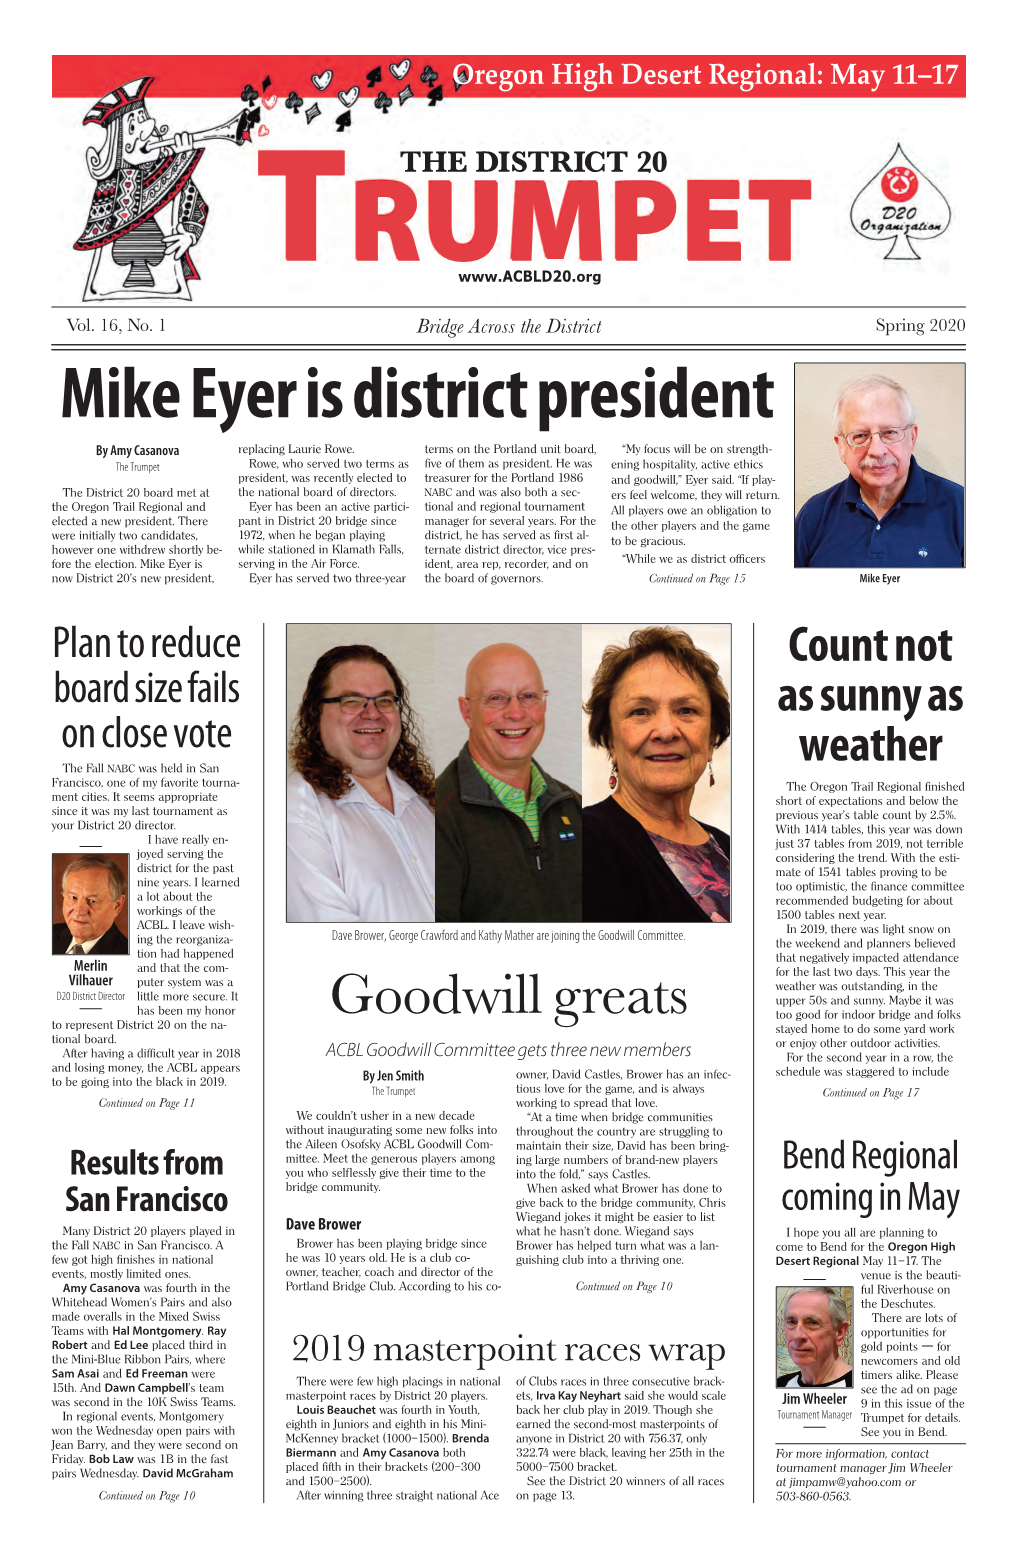 Mike Eyer Is District President by Amy Casanova Replacing Laurie Rowe